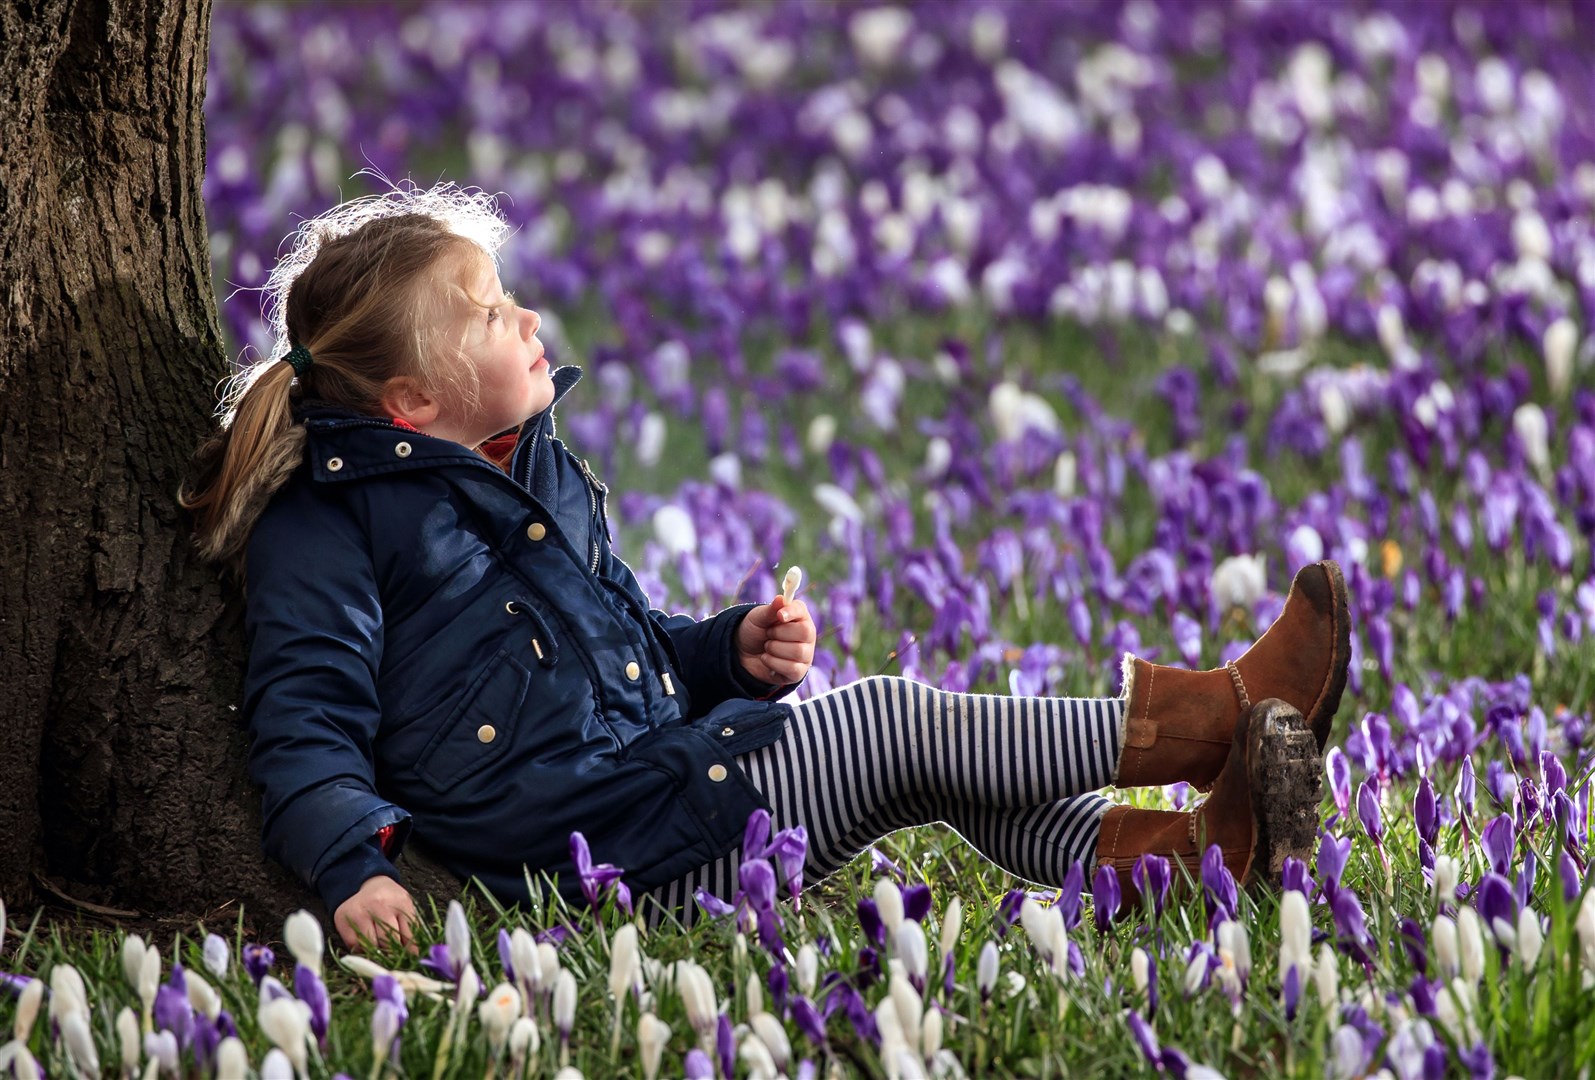 Fern Gibson holds a crocus at Kirkstall Abbey Park in Leeds, West Yorkshire (Danny Lawson/PA)